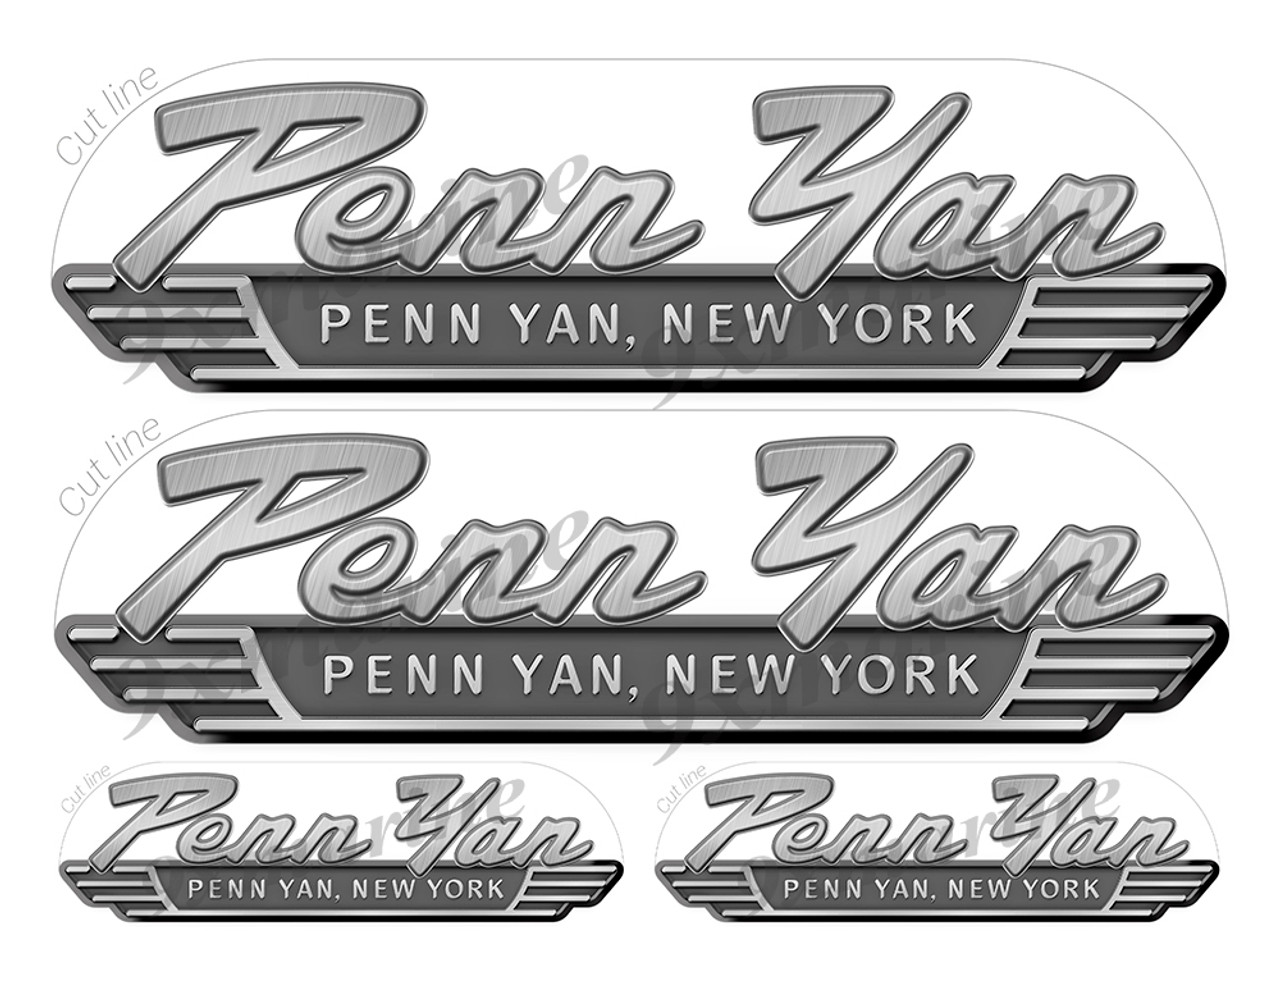 Penn Yan Remastered Stickers. Brushed Metal Style - 10" and 5" long